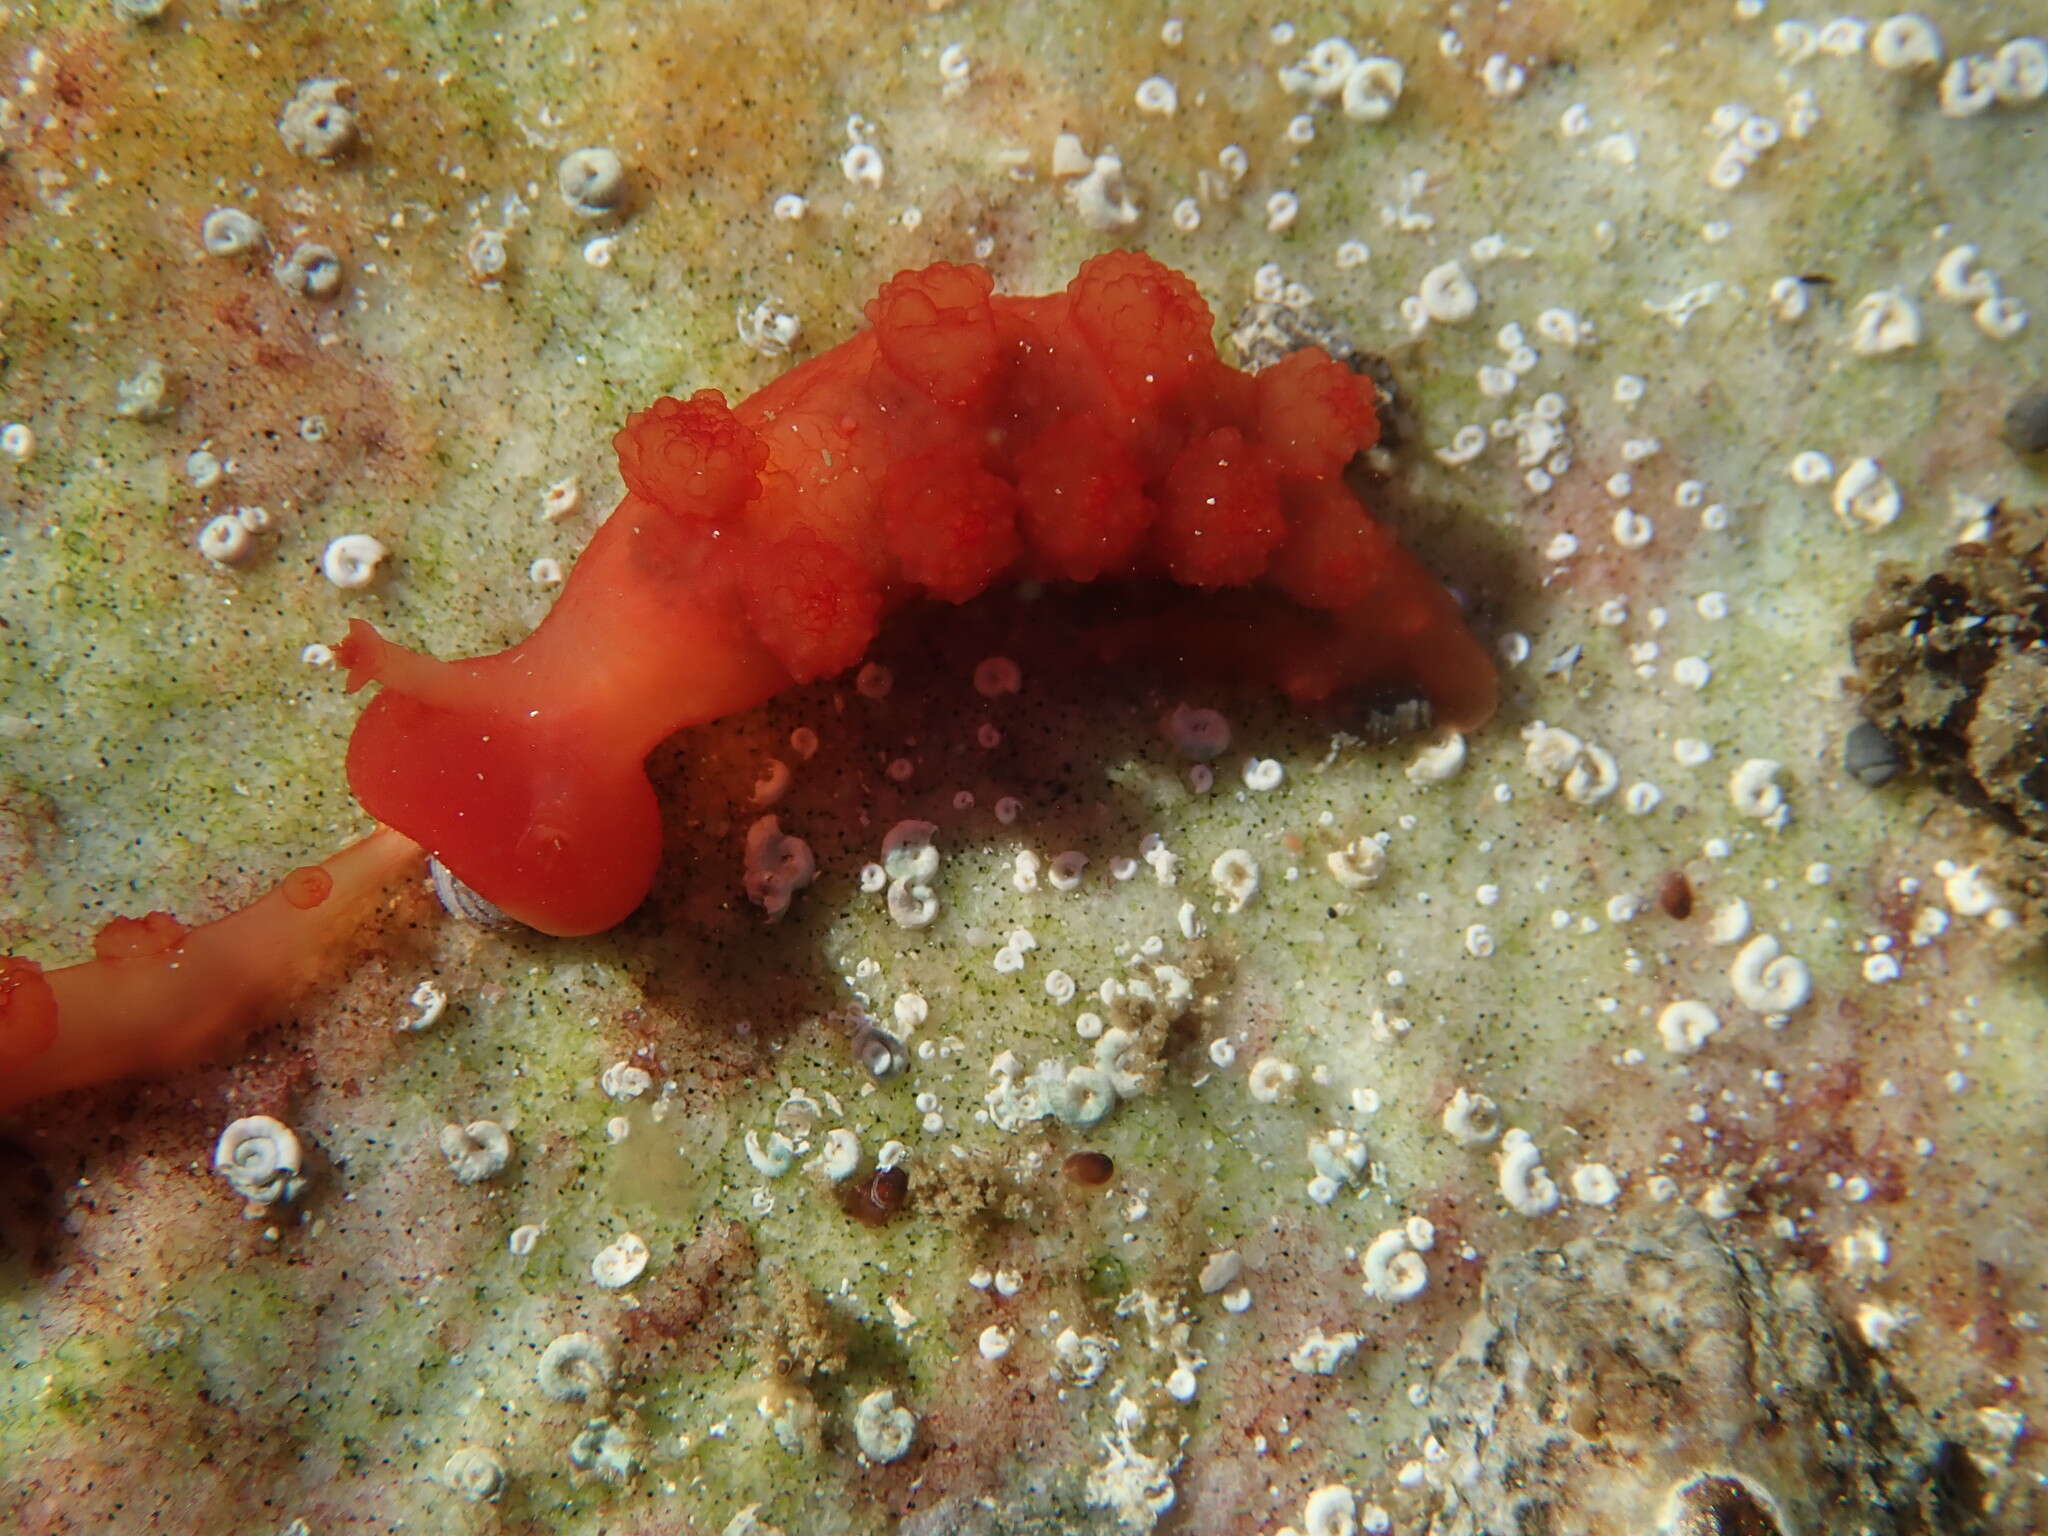 Image of Cowled nudibranch